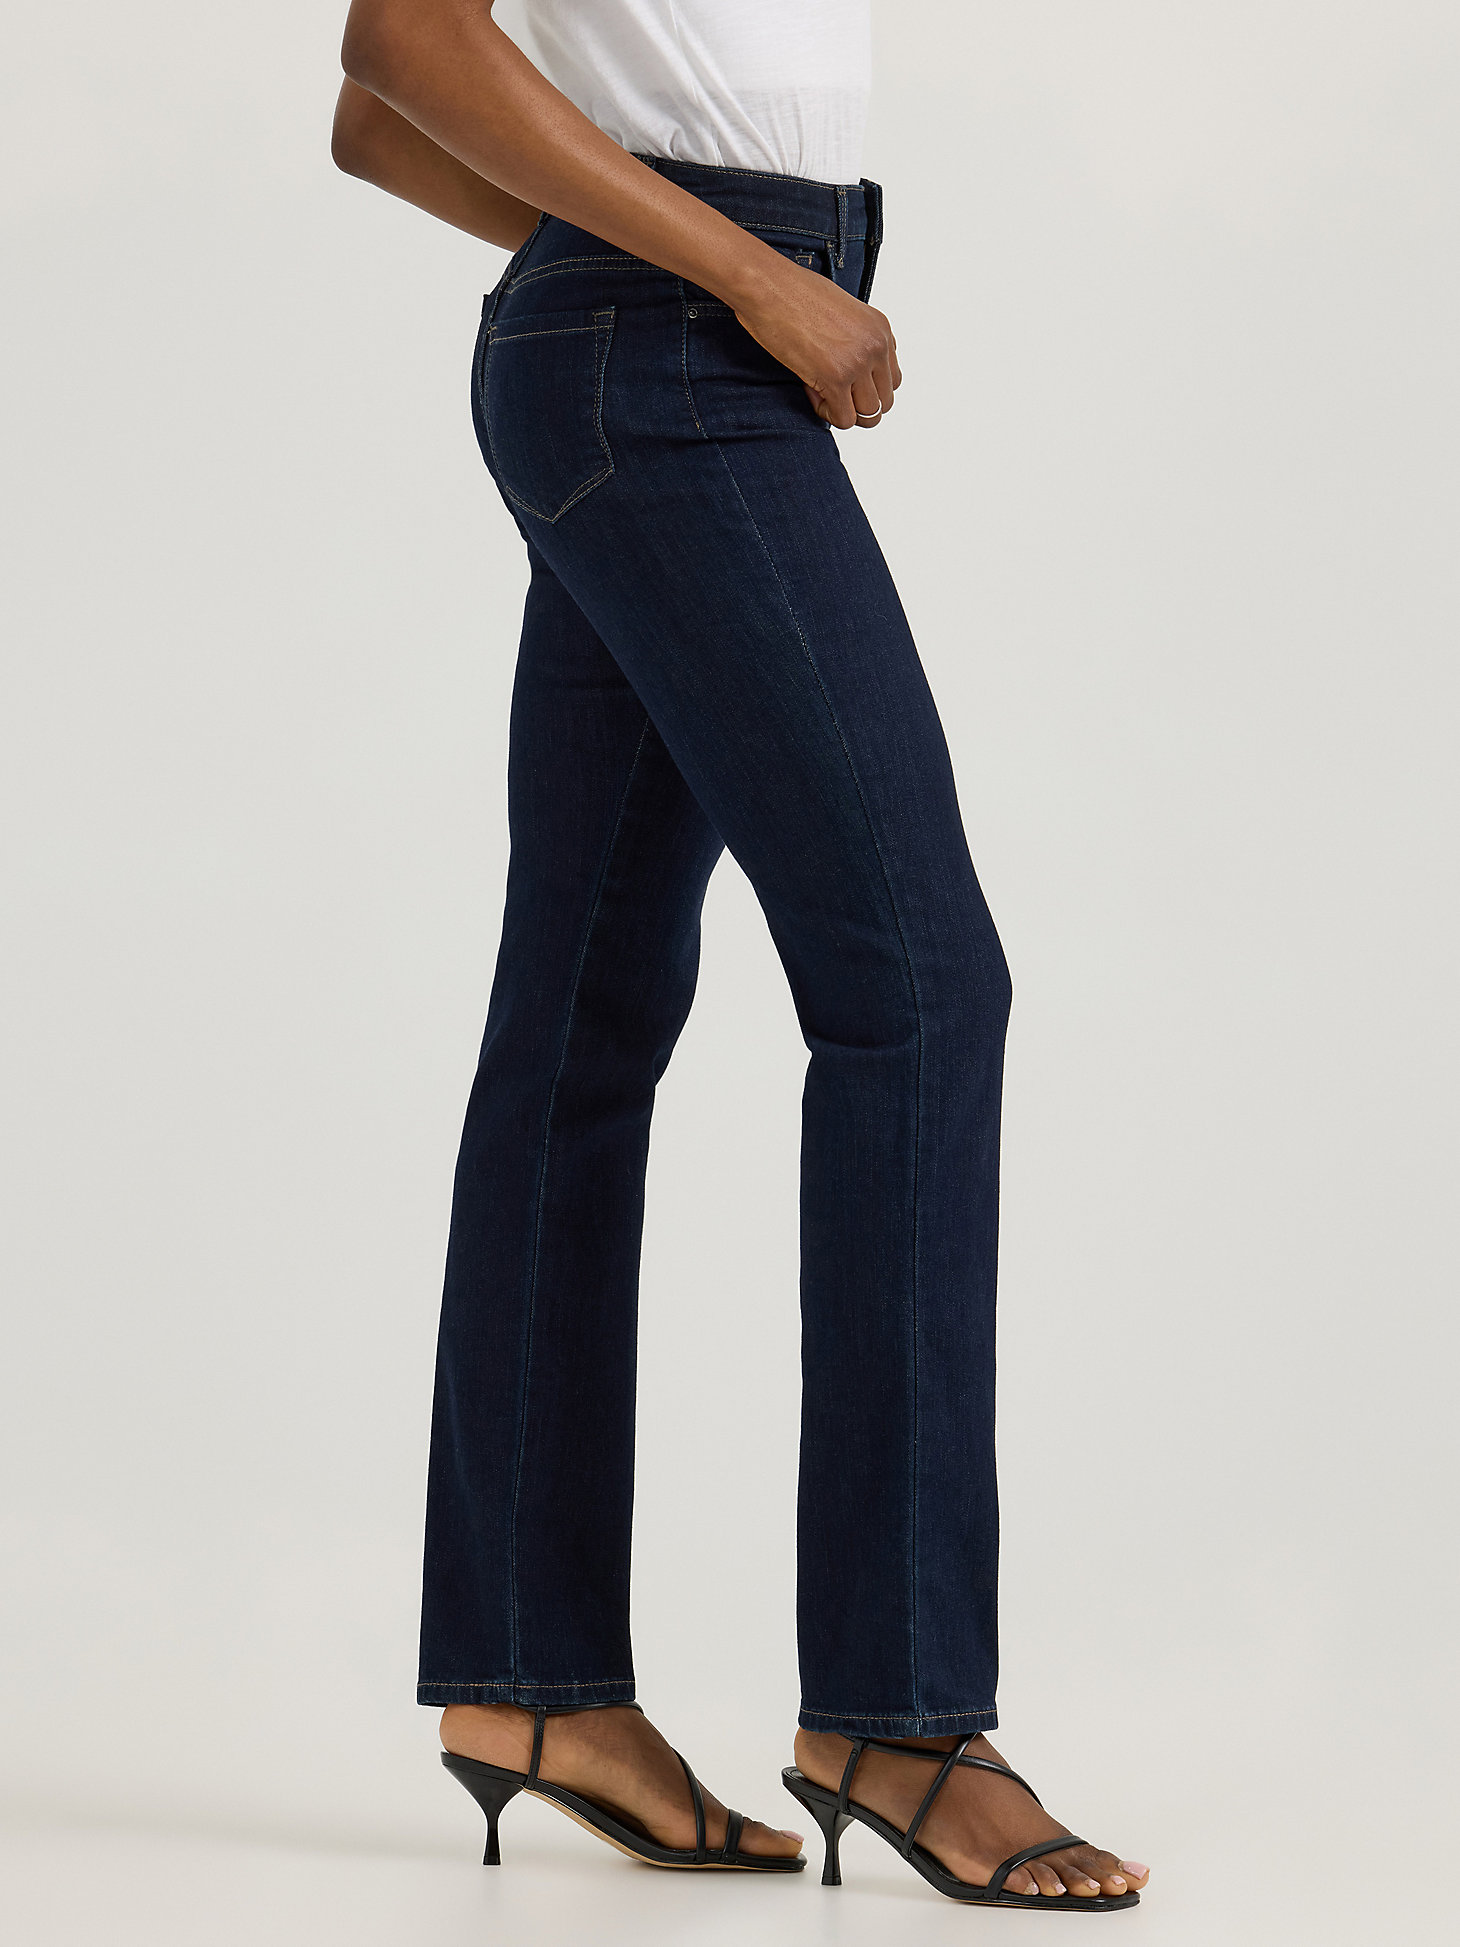 Women’s Instantly Slims Relaxed Fit Straight Leg Jean Classic Fit in Heritage alternative view 3